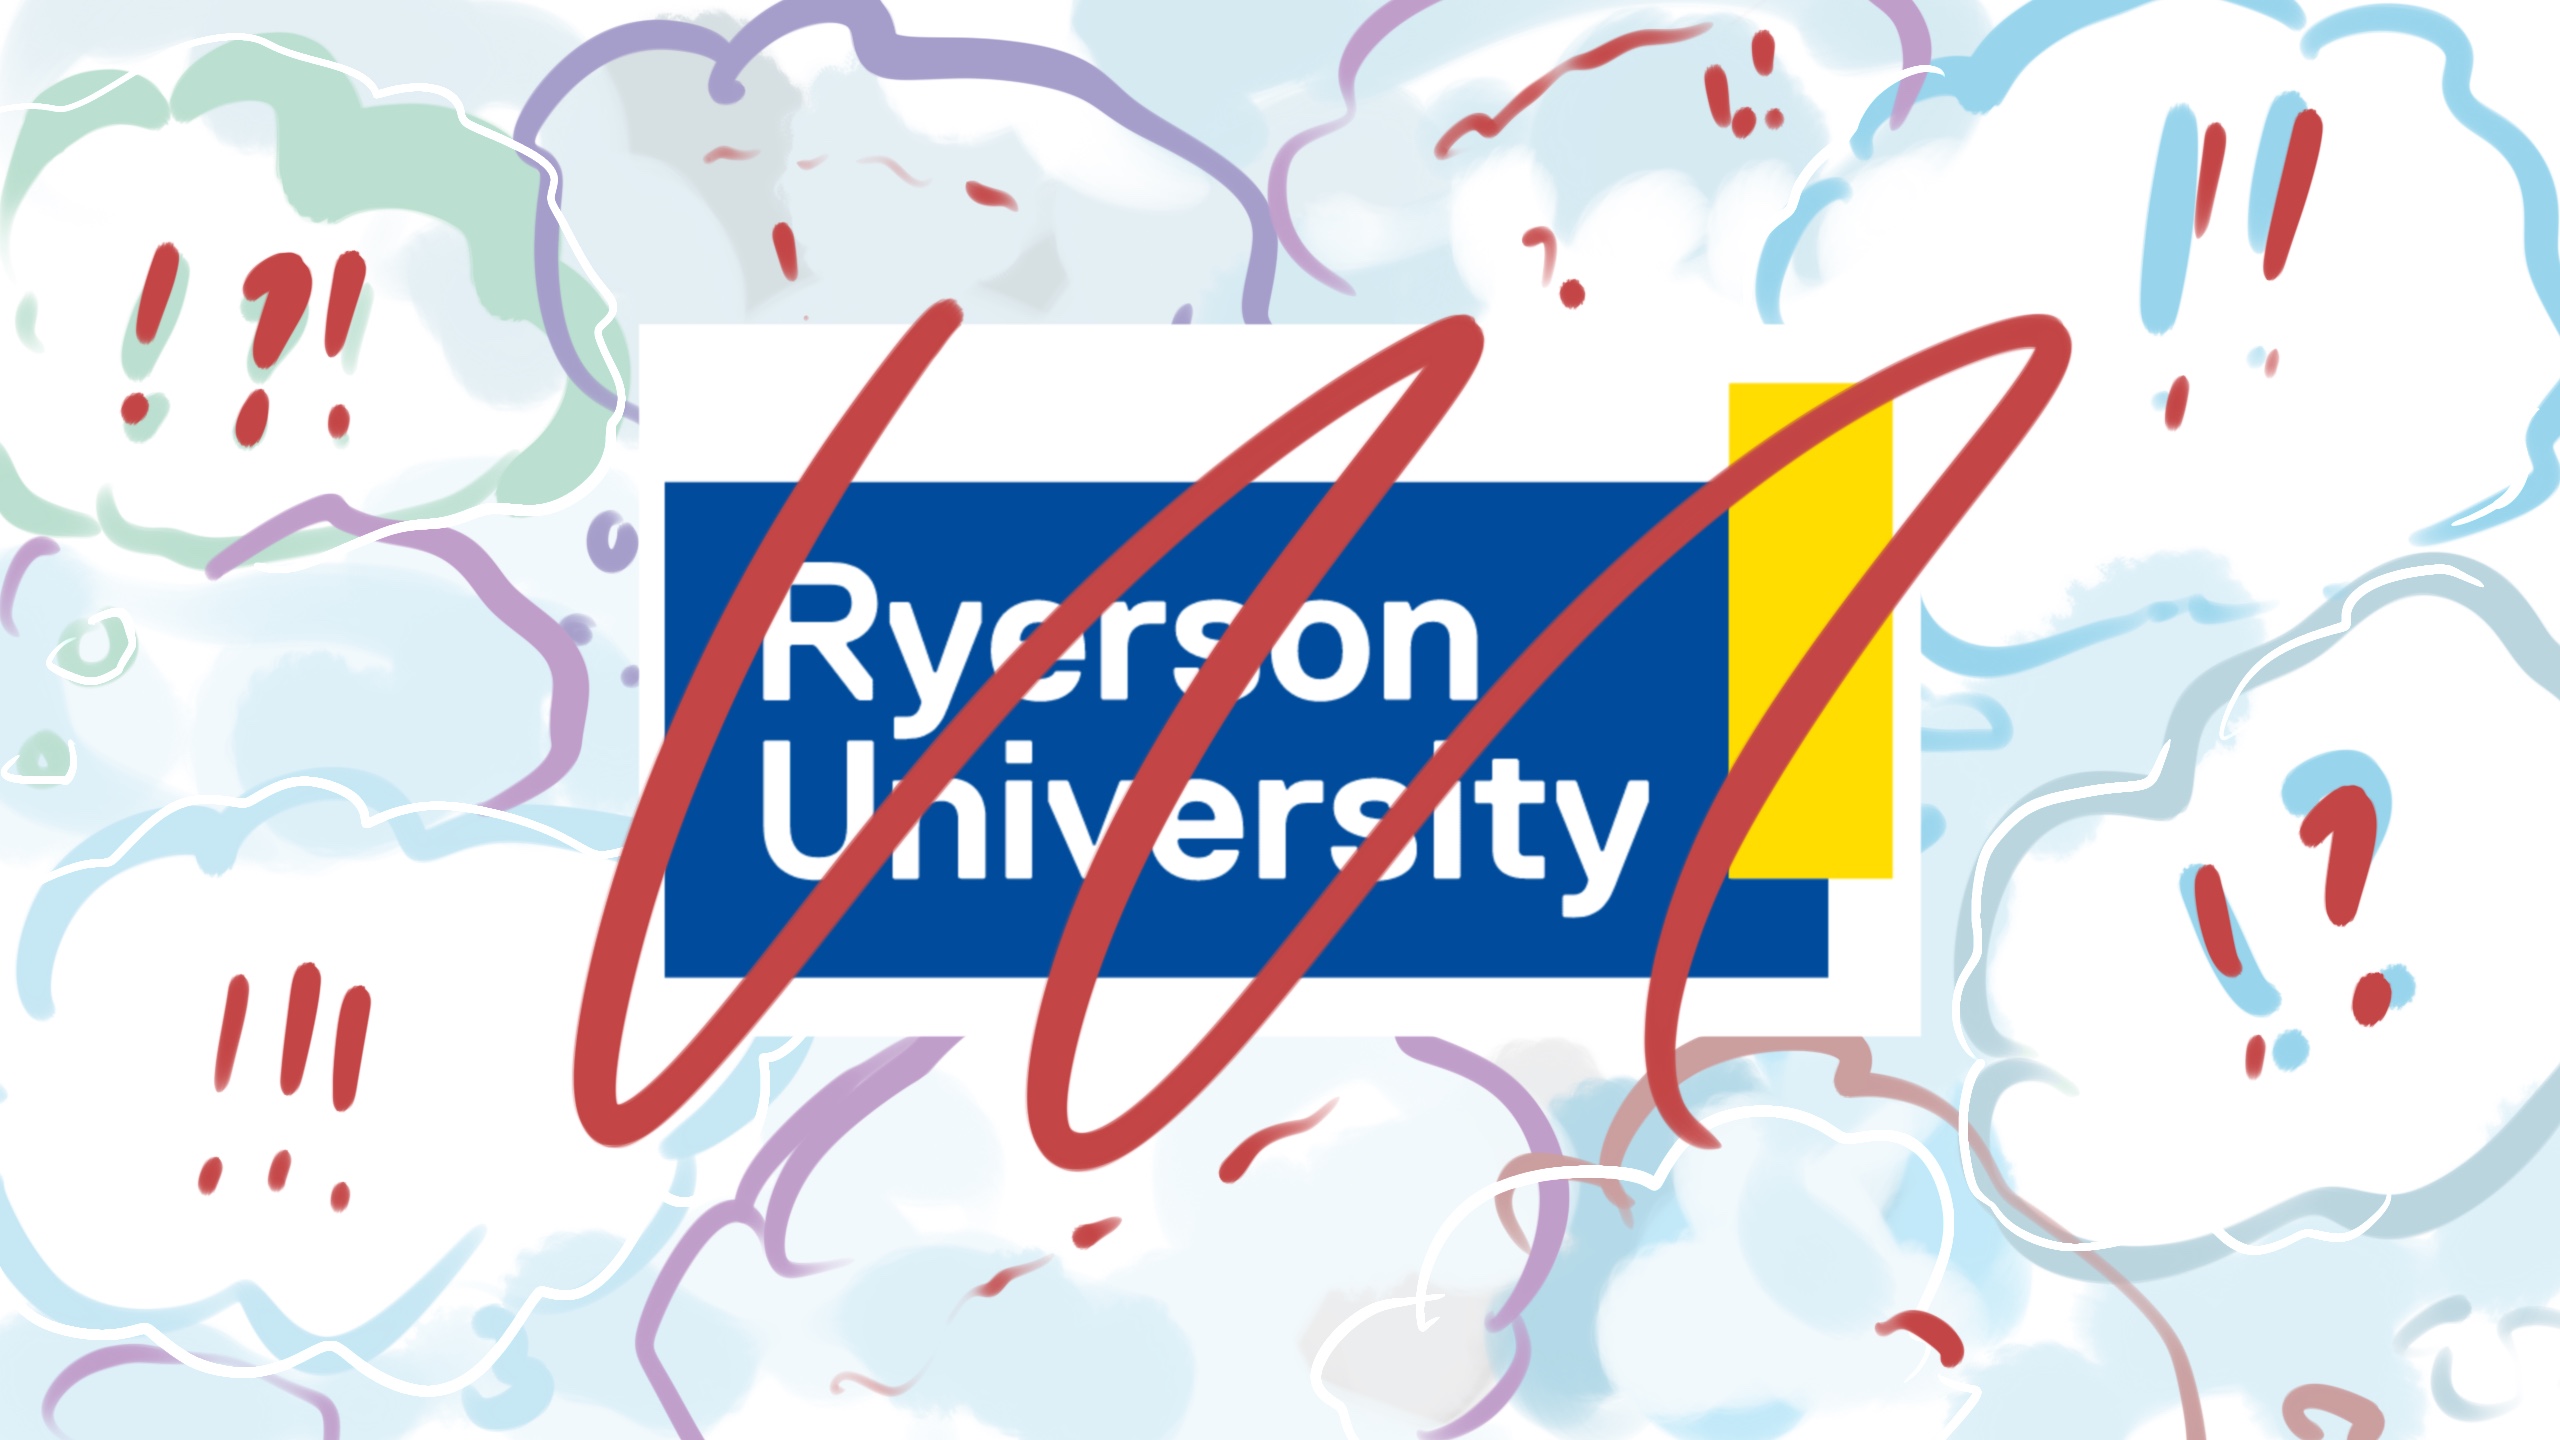 The Ryerson logo crossed out with clouds of exclamation marks and question marks around it